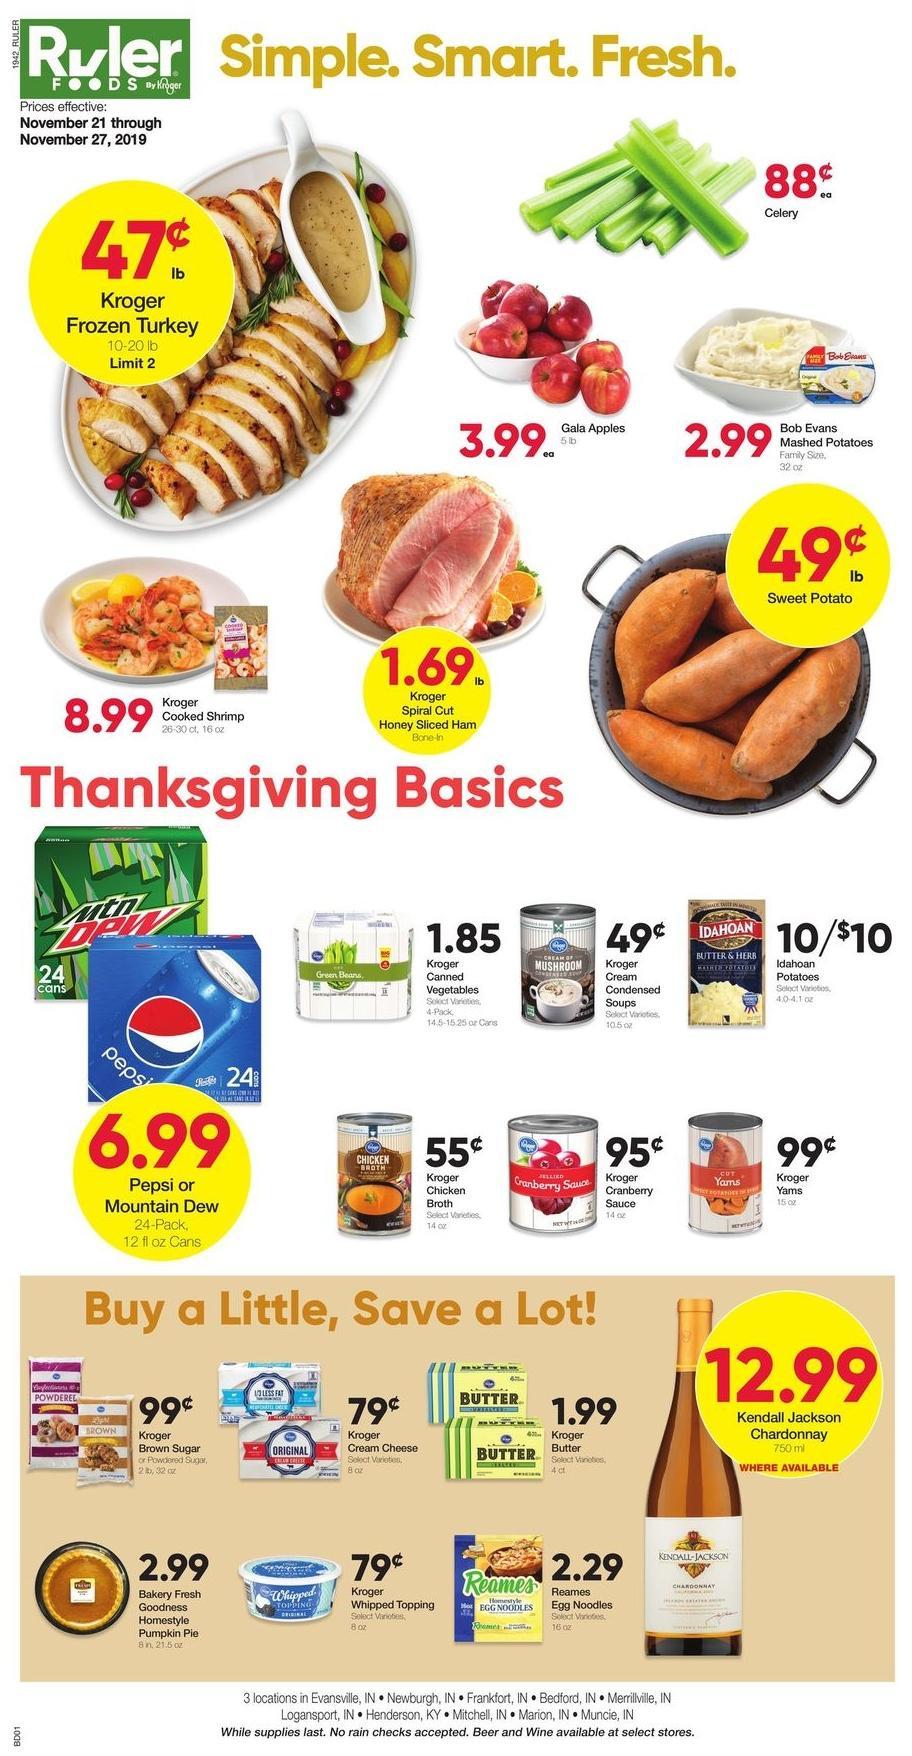 Ruler Foods Weekly Ad from November 21